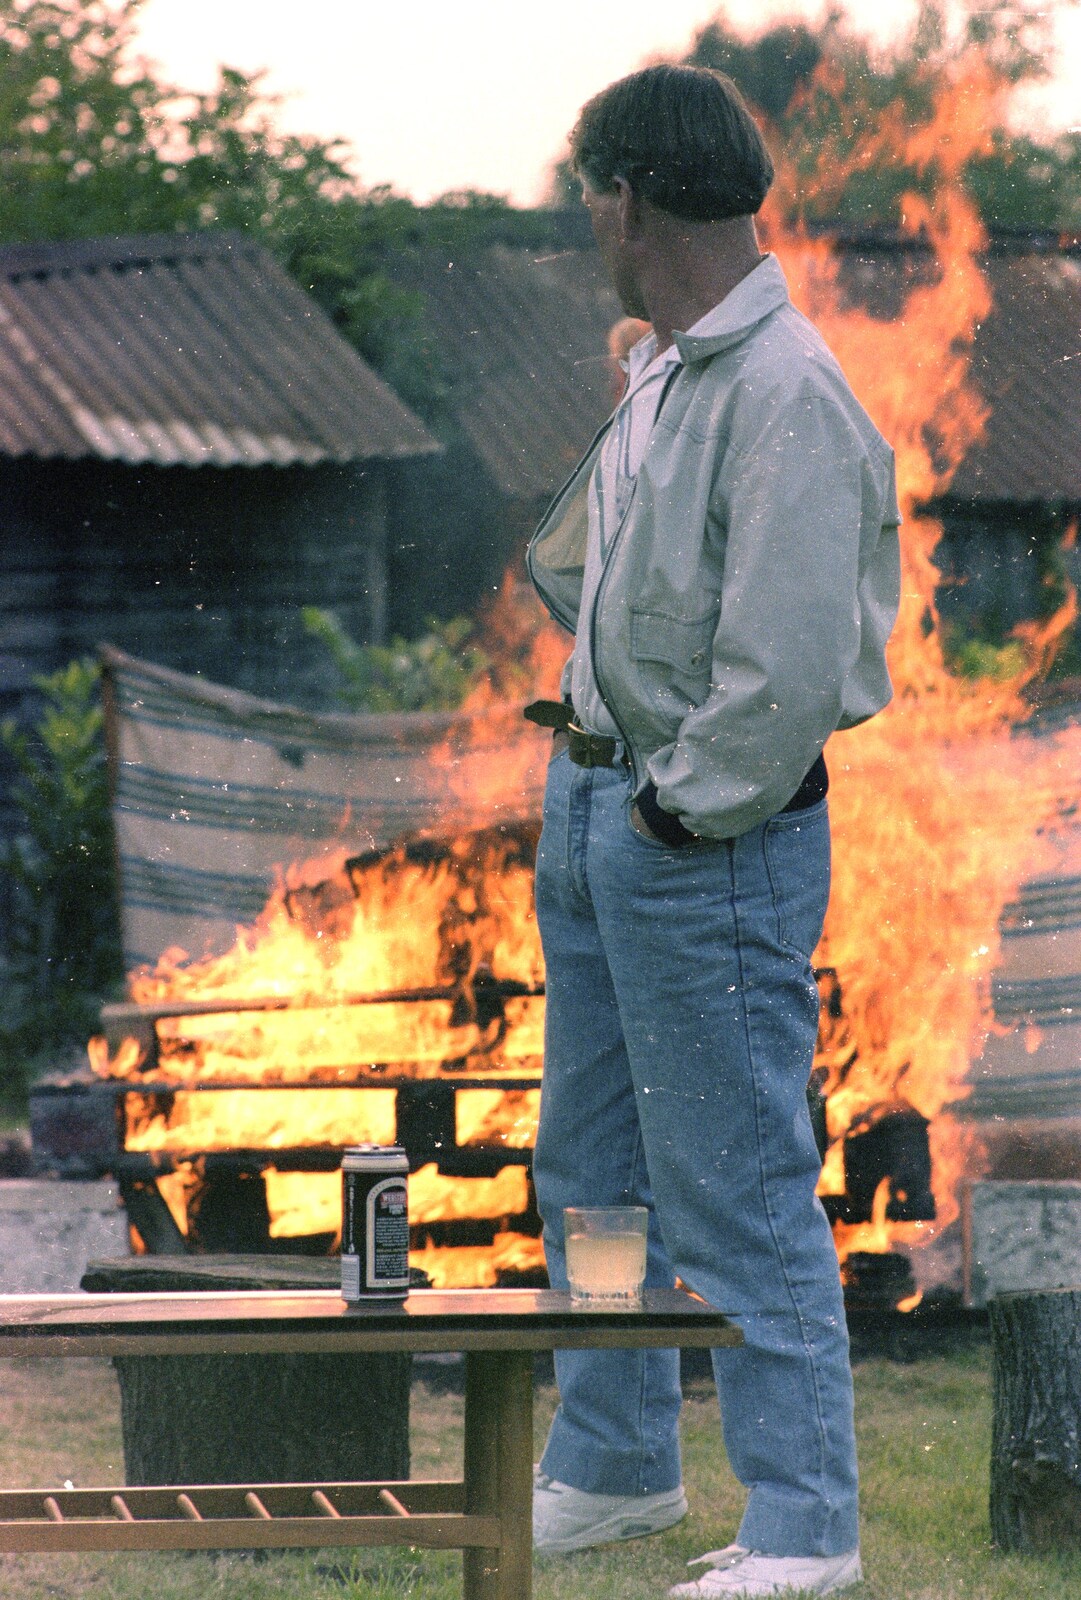 Bernie considers the towering inferno of pallets from A Geoff and Brenda Barbeque, Stuston, Suffolk - 3rd April 1994